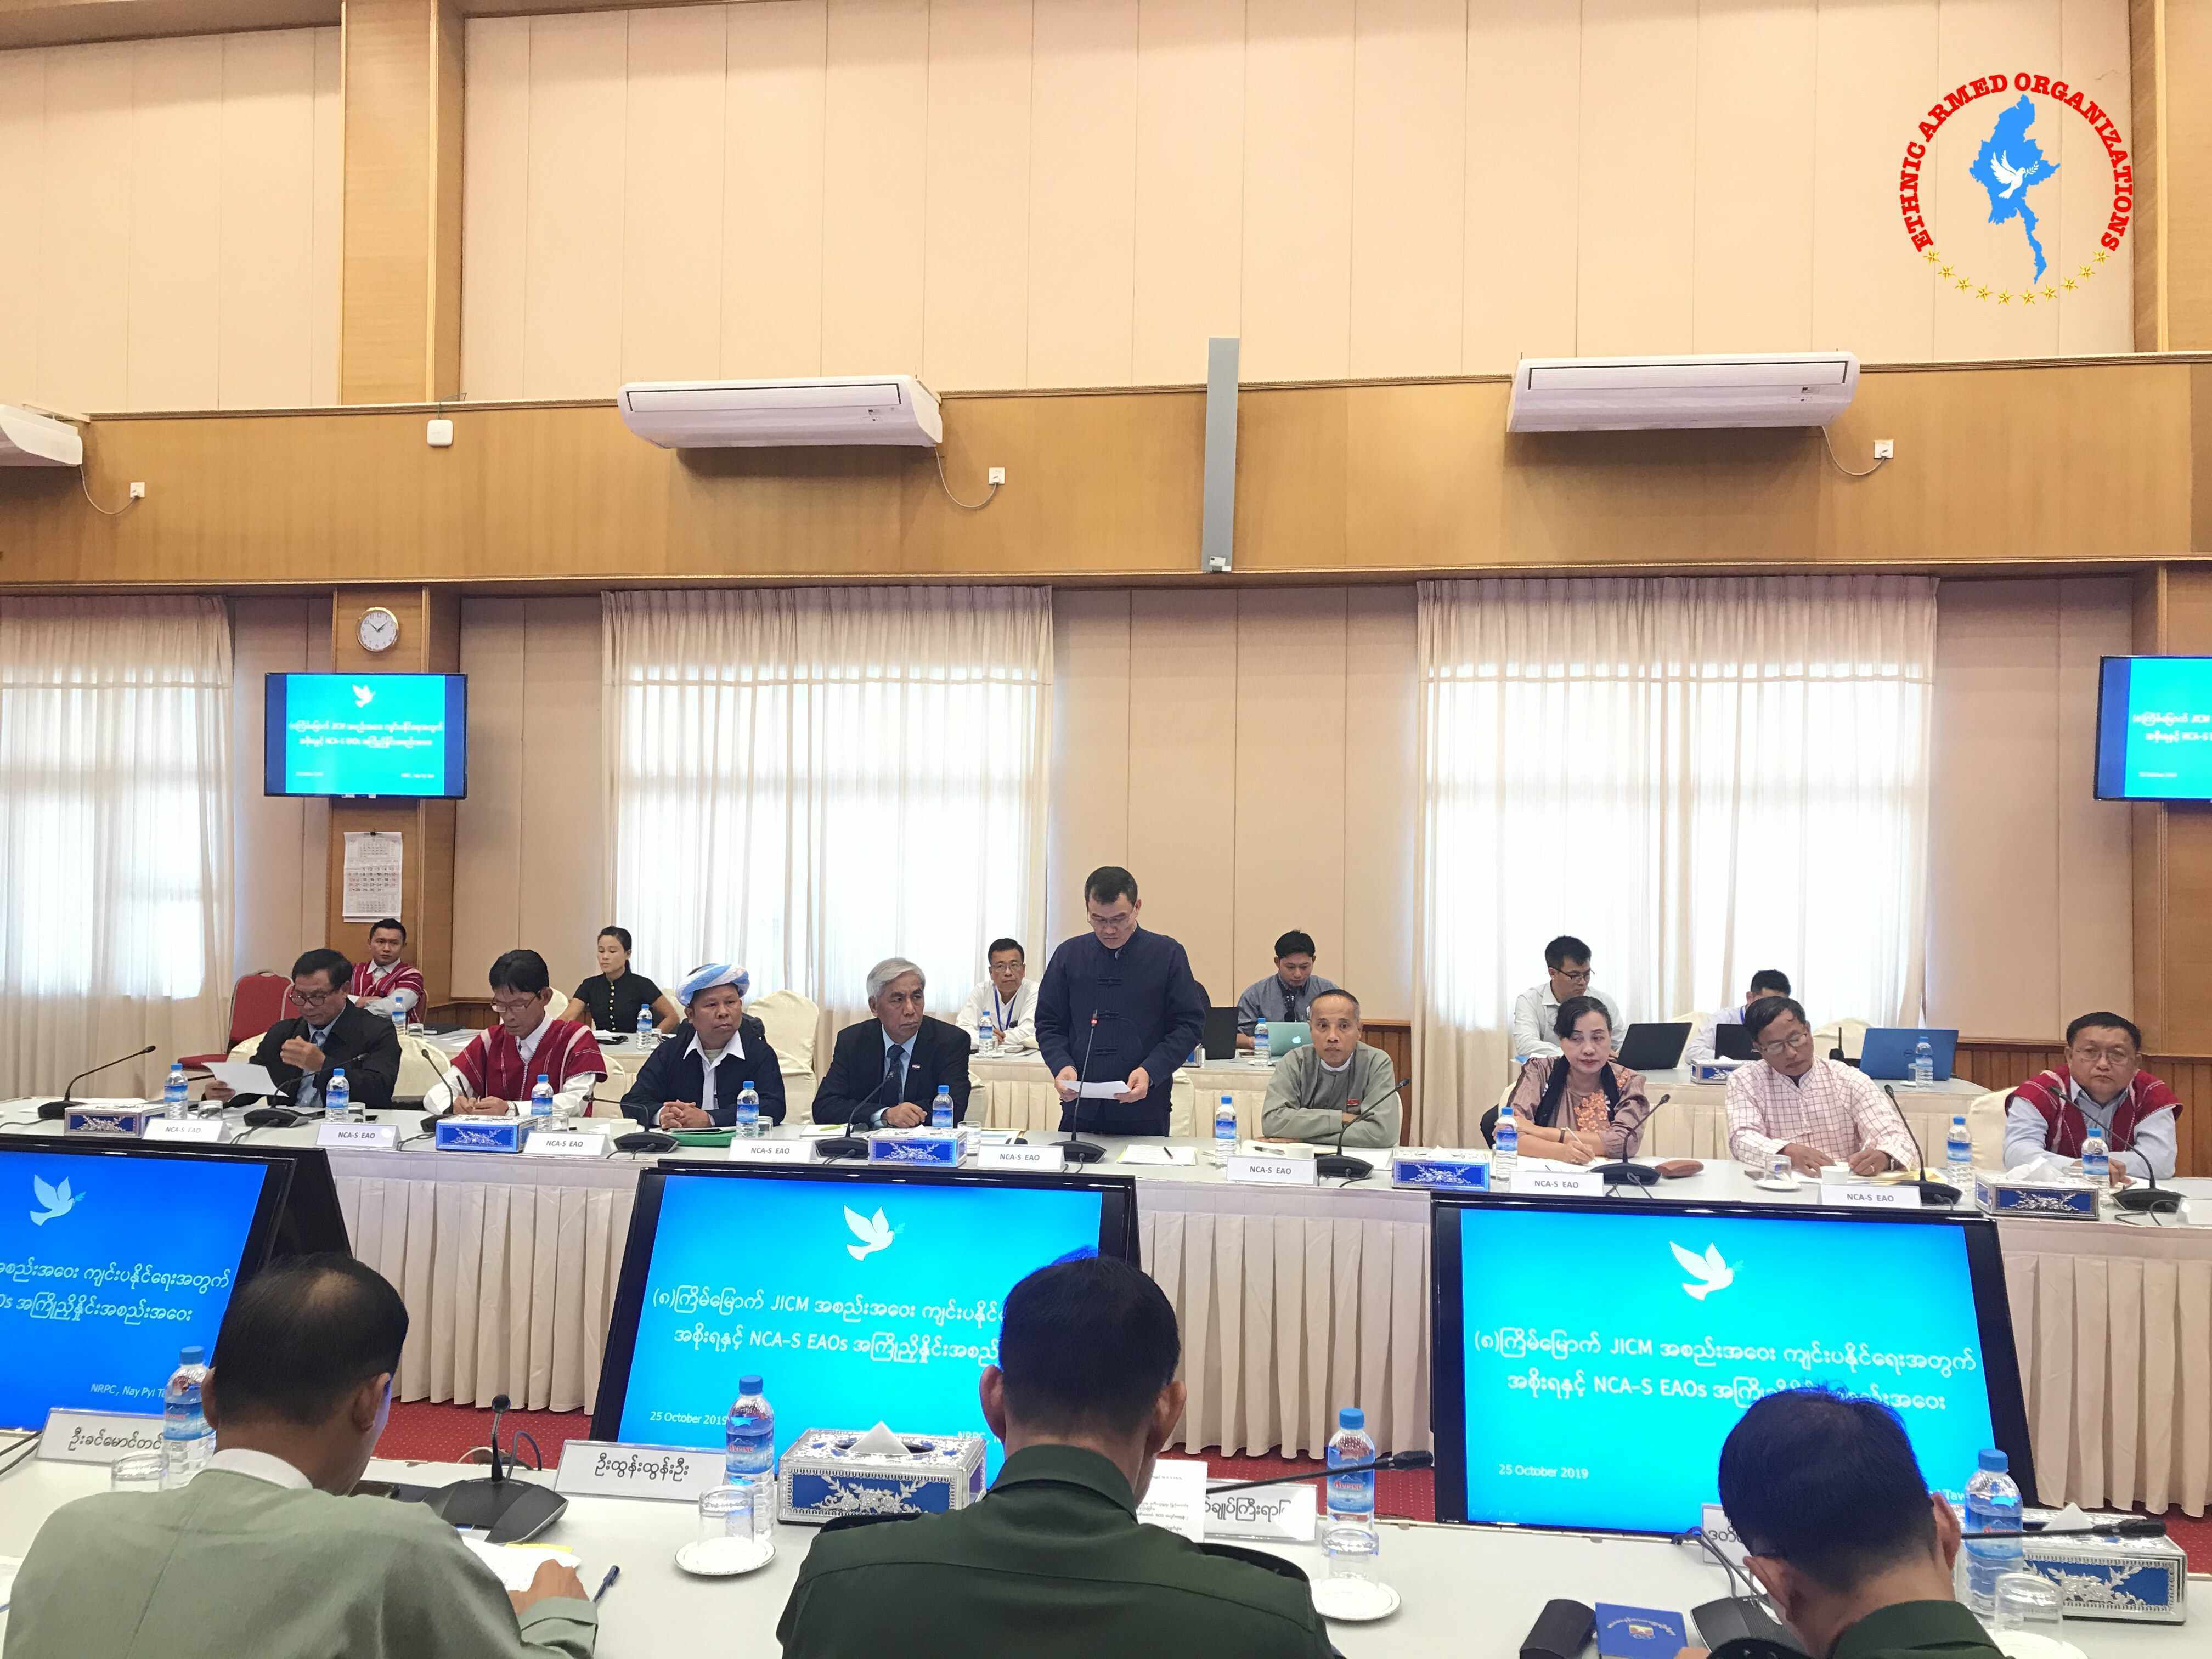 Preparatory meeting between the Government and NCA-S EAO for 8th JICM held at NRPC, Nay Pyi Taw